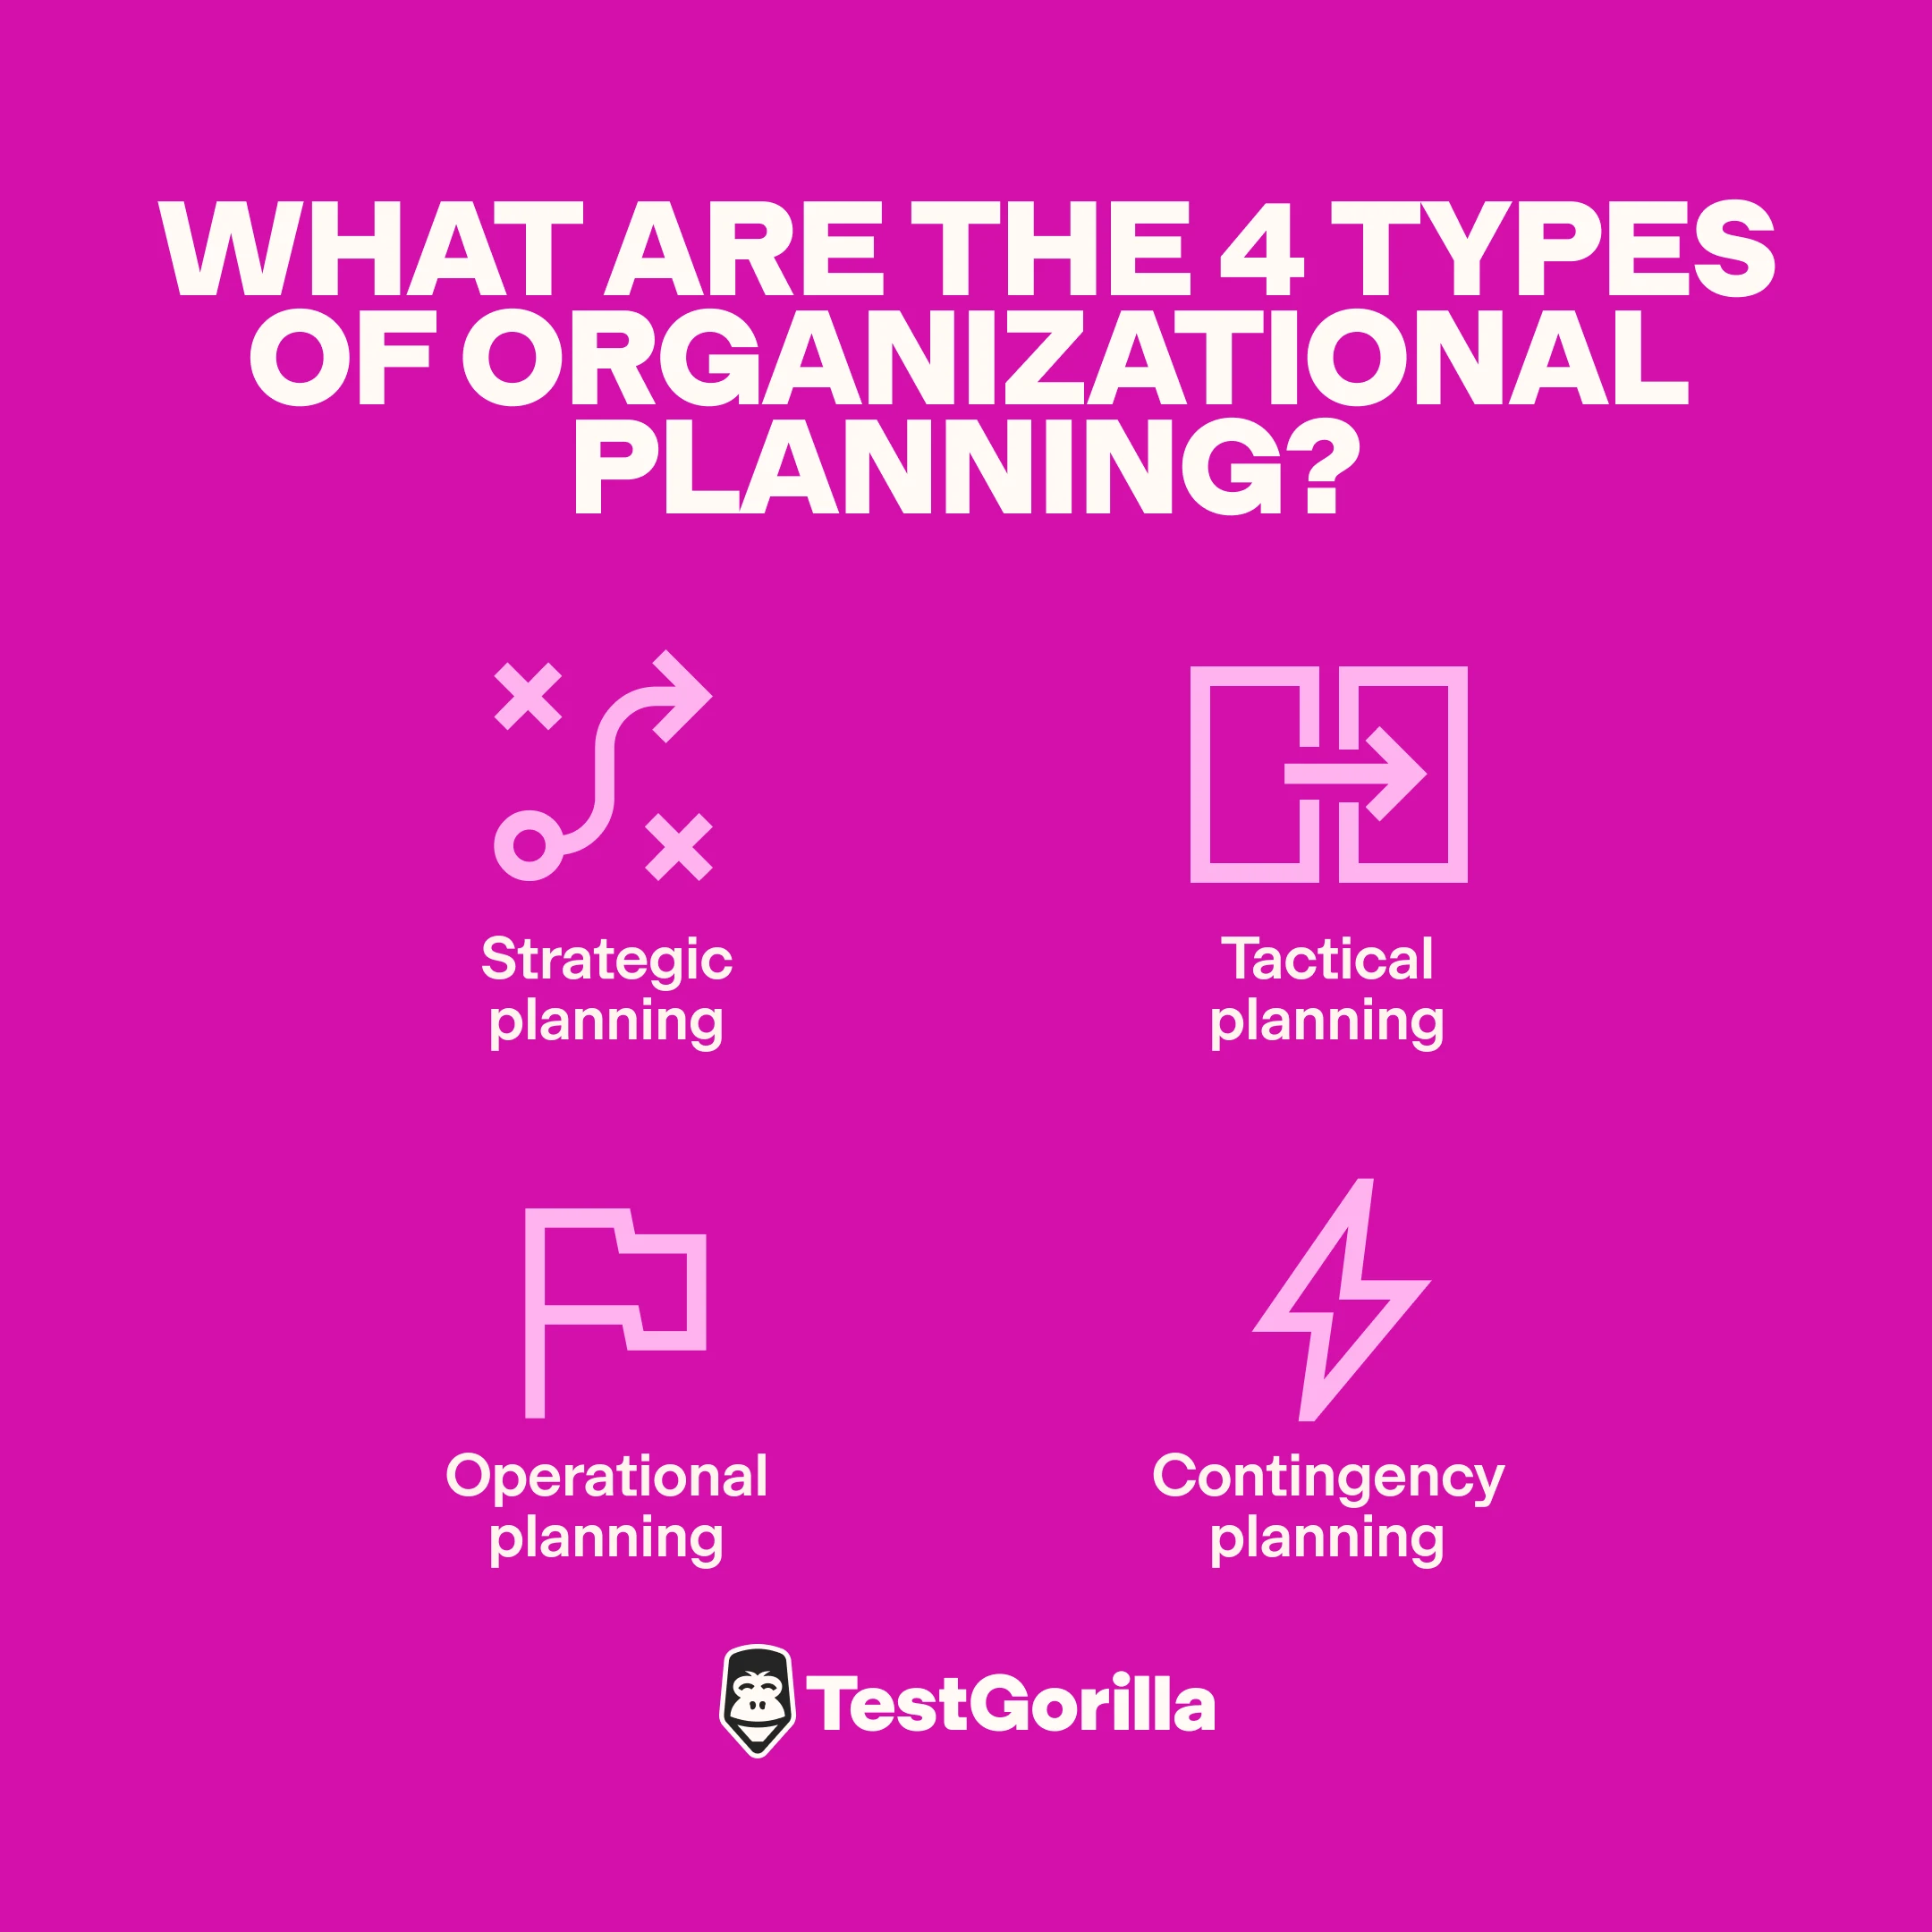 What are the 4 types of organizational planning?